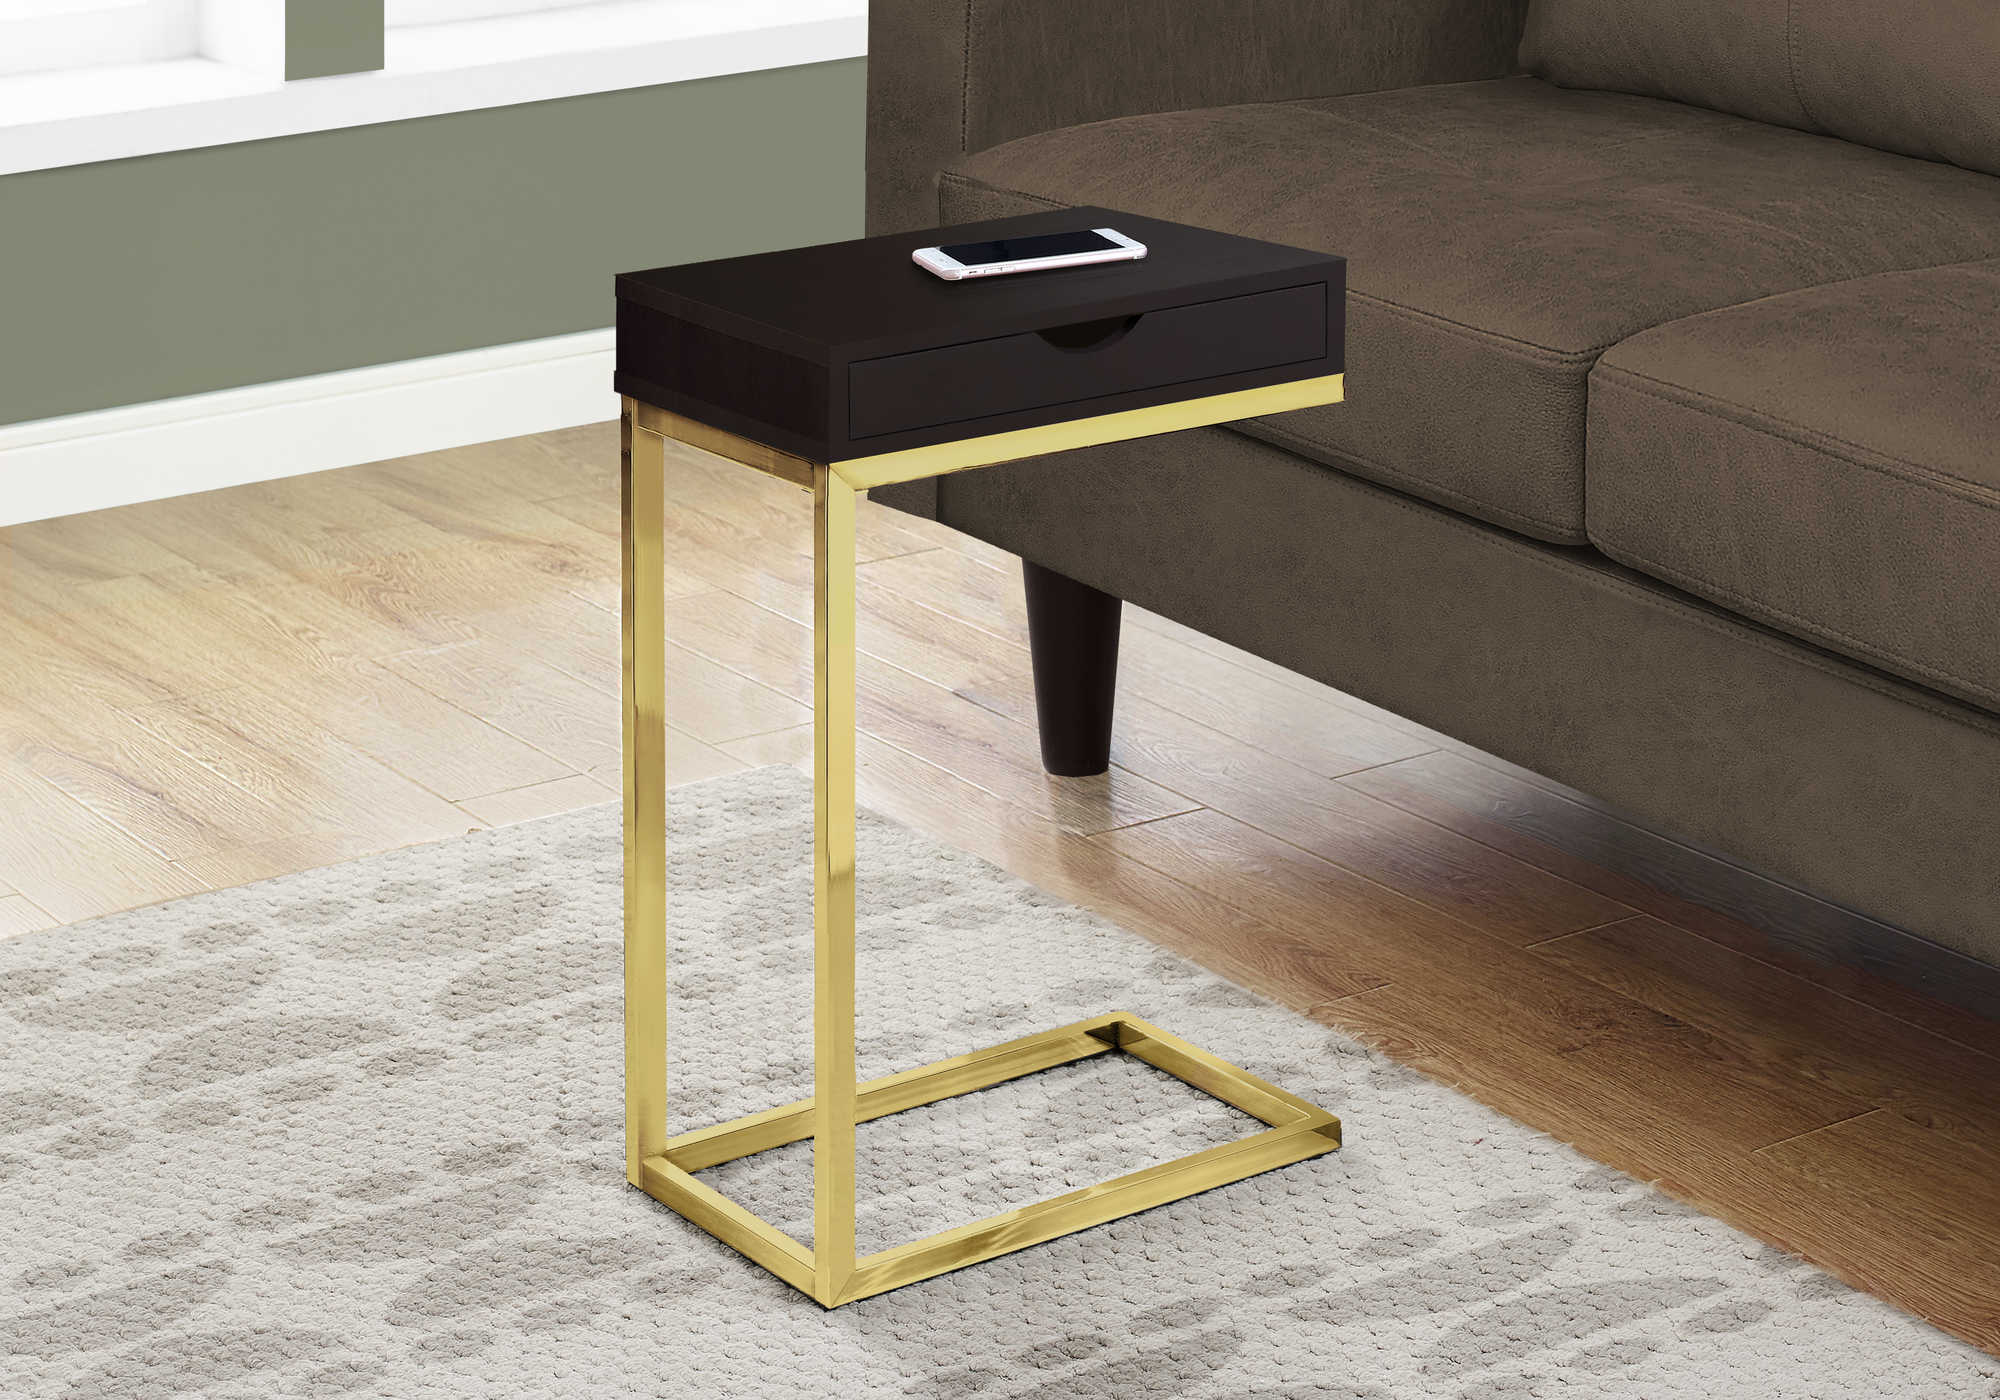 ACCENT TABLE - ESPRESSO / GOLD METAL WITH A DRAWER